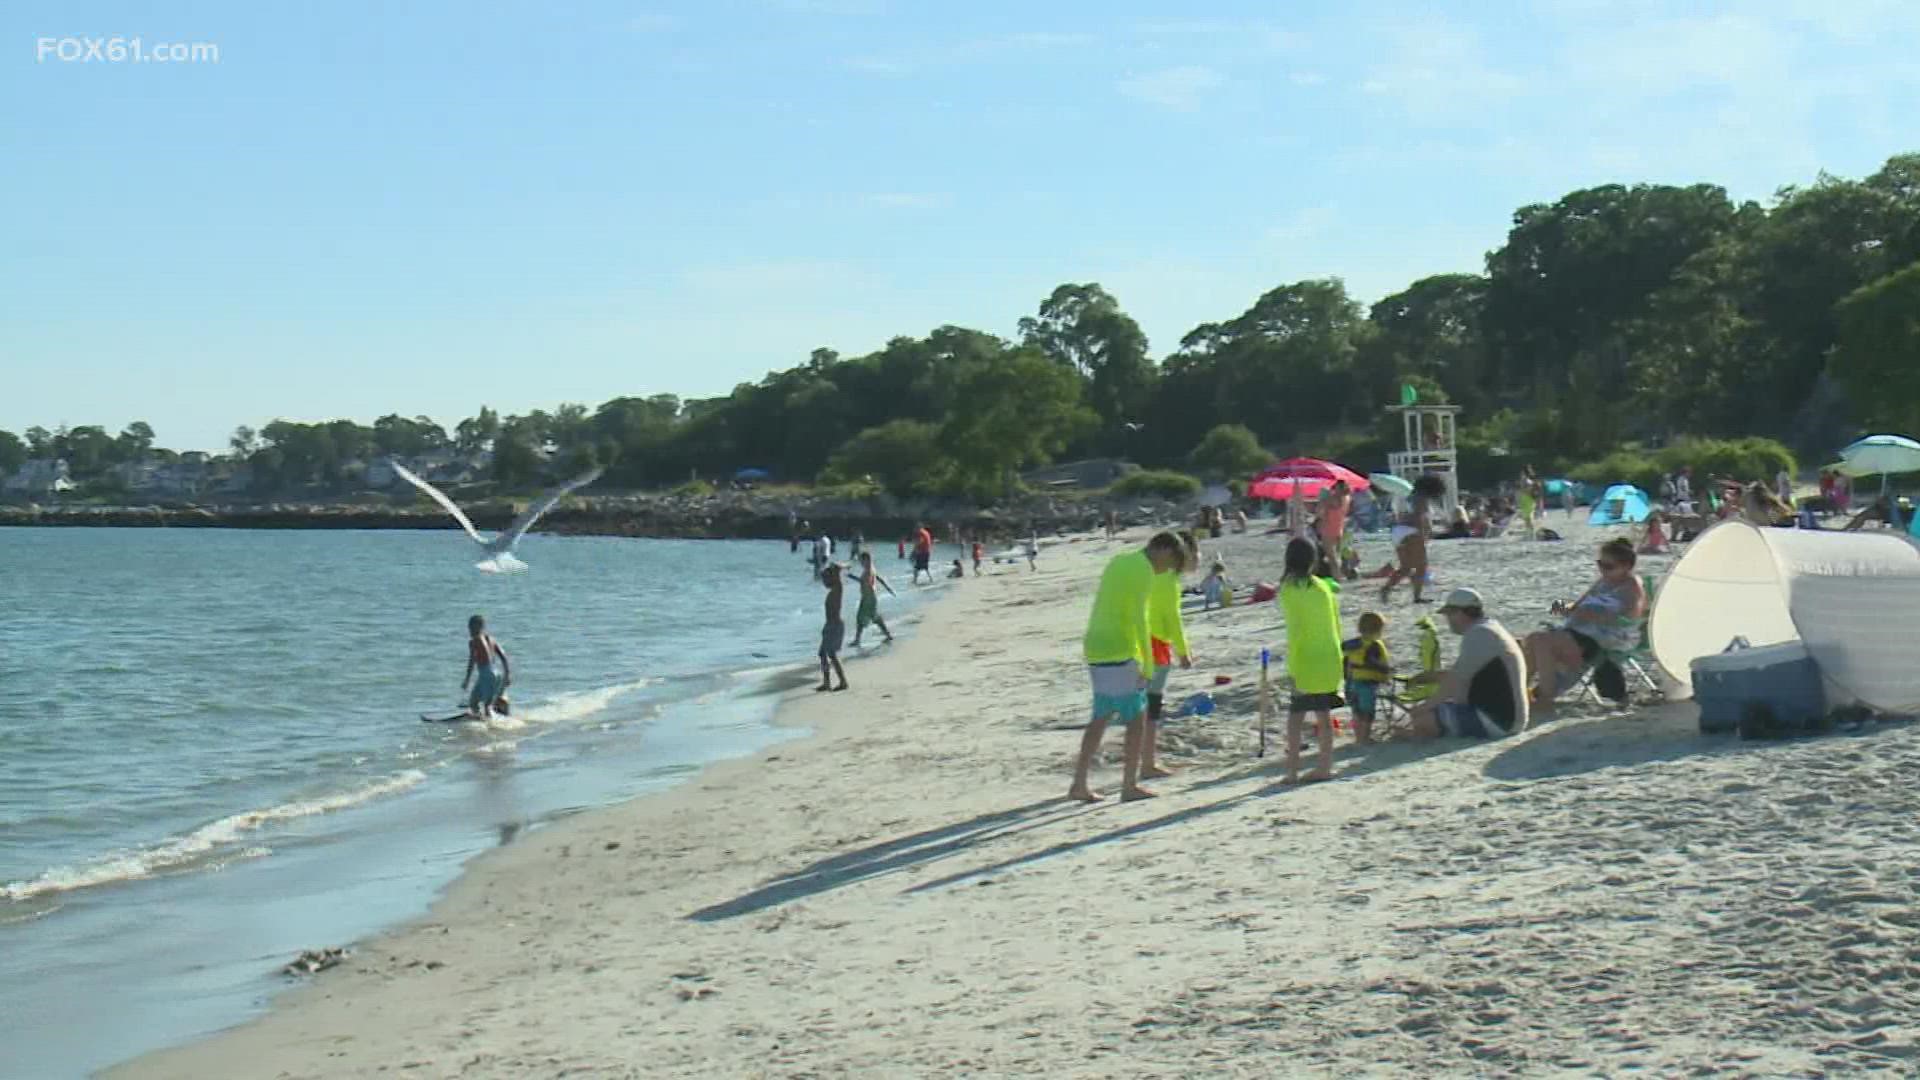 All eight major state parks in Connecticut will have lifeguards to keep watch.